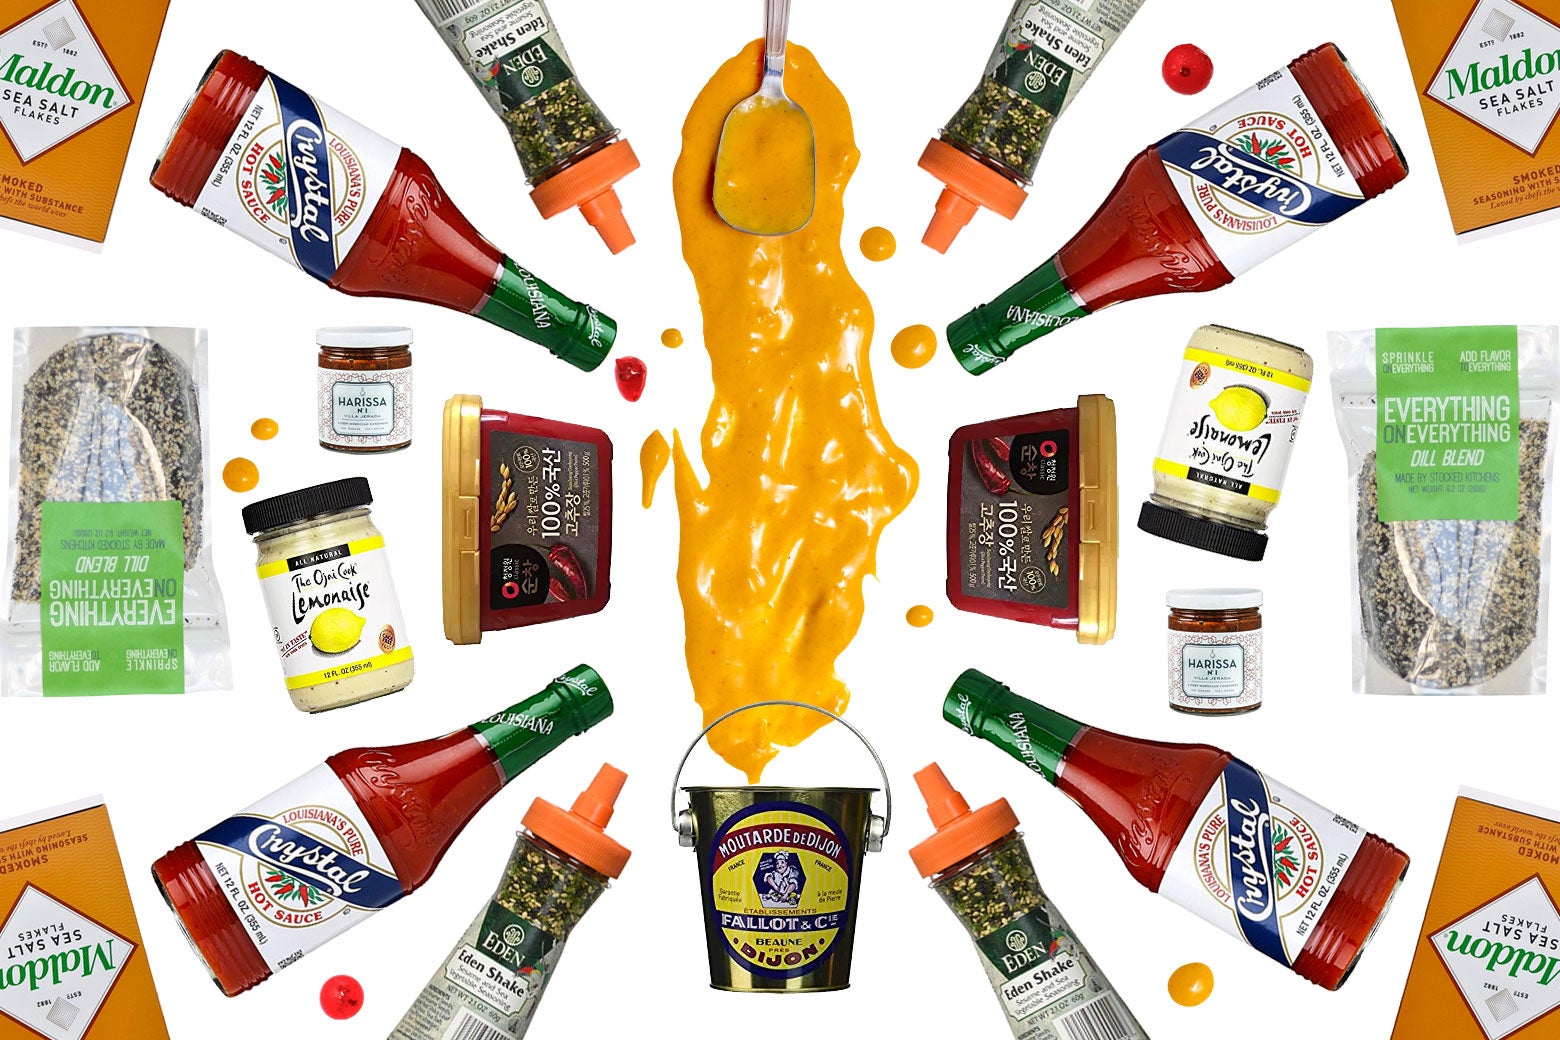 Mustard and other condiments in a colorful array.